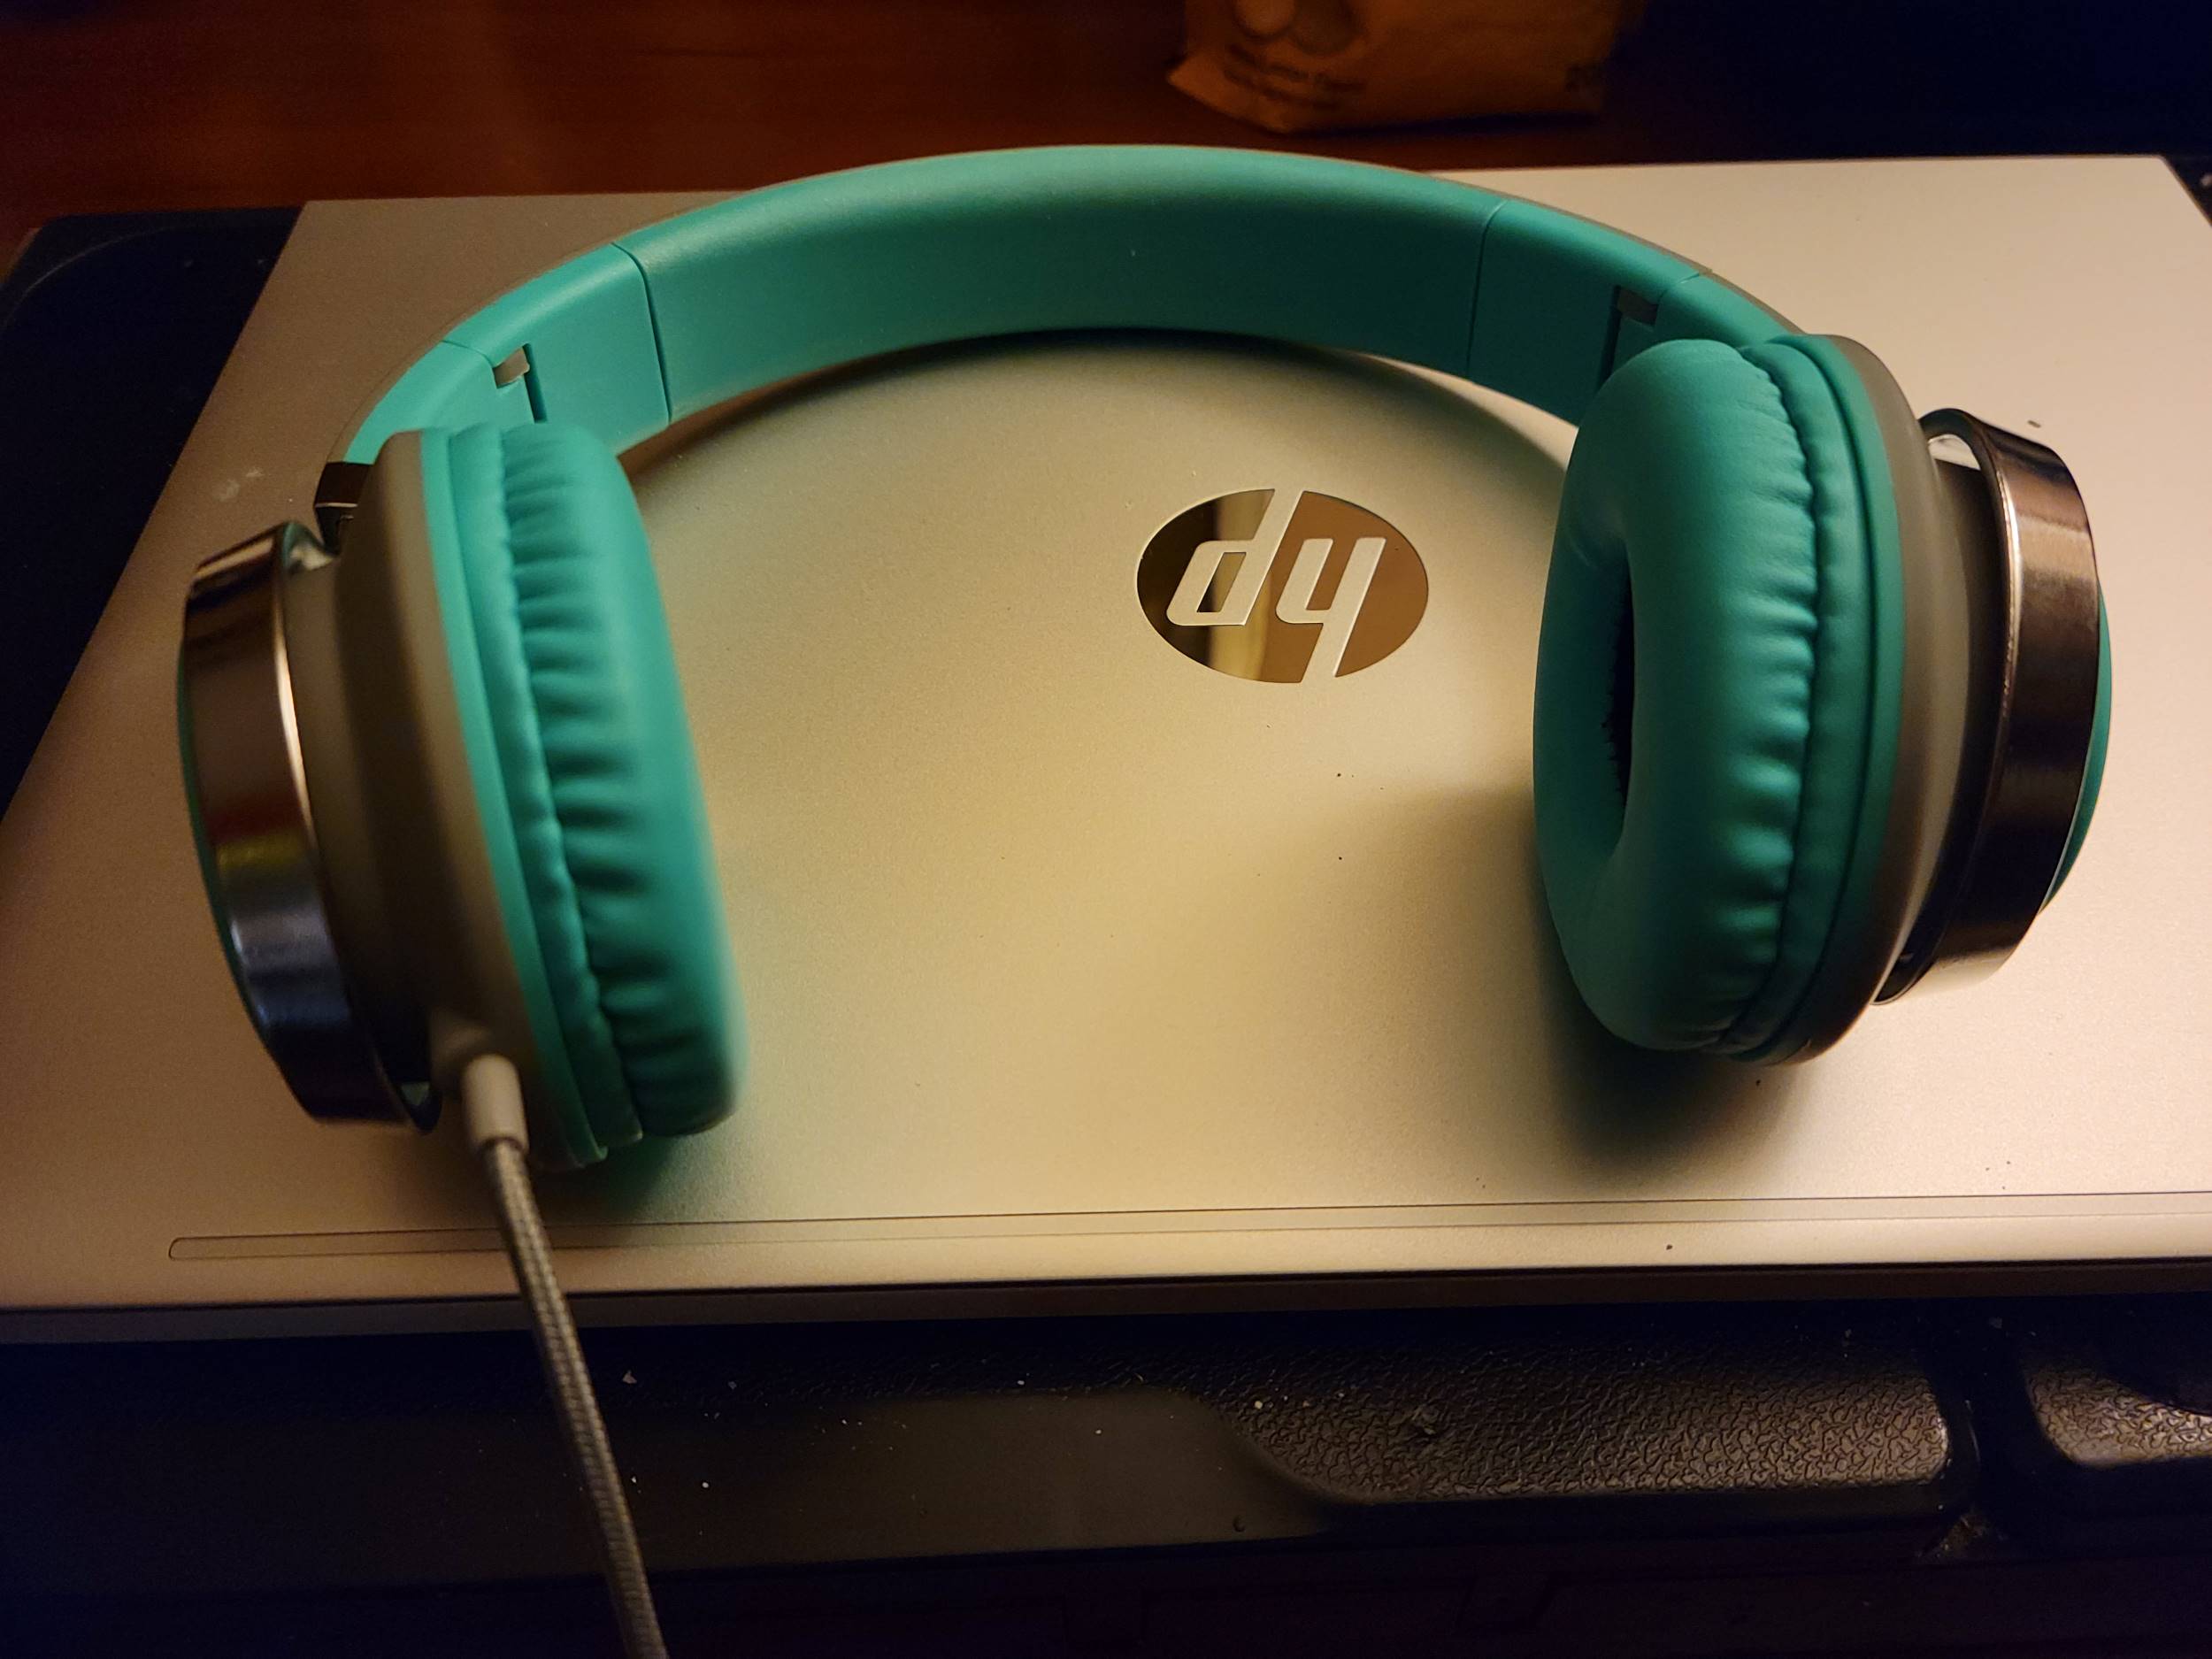 A set of teal and metallic headphones are on top of a laptop. 